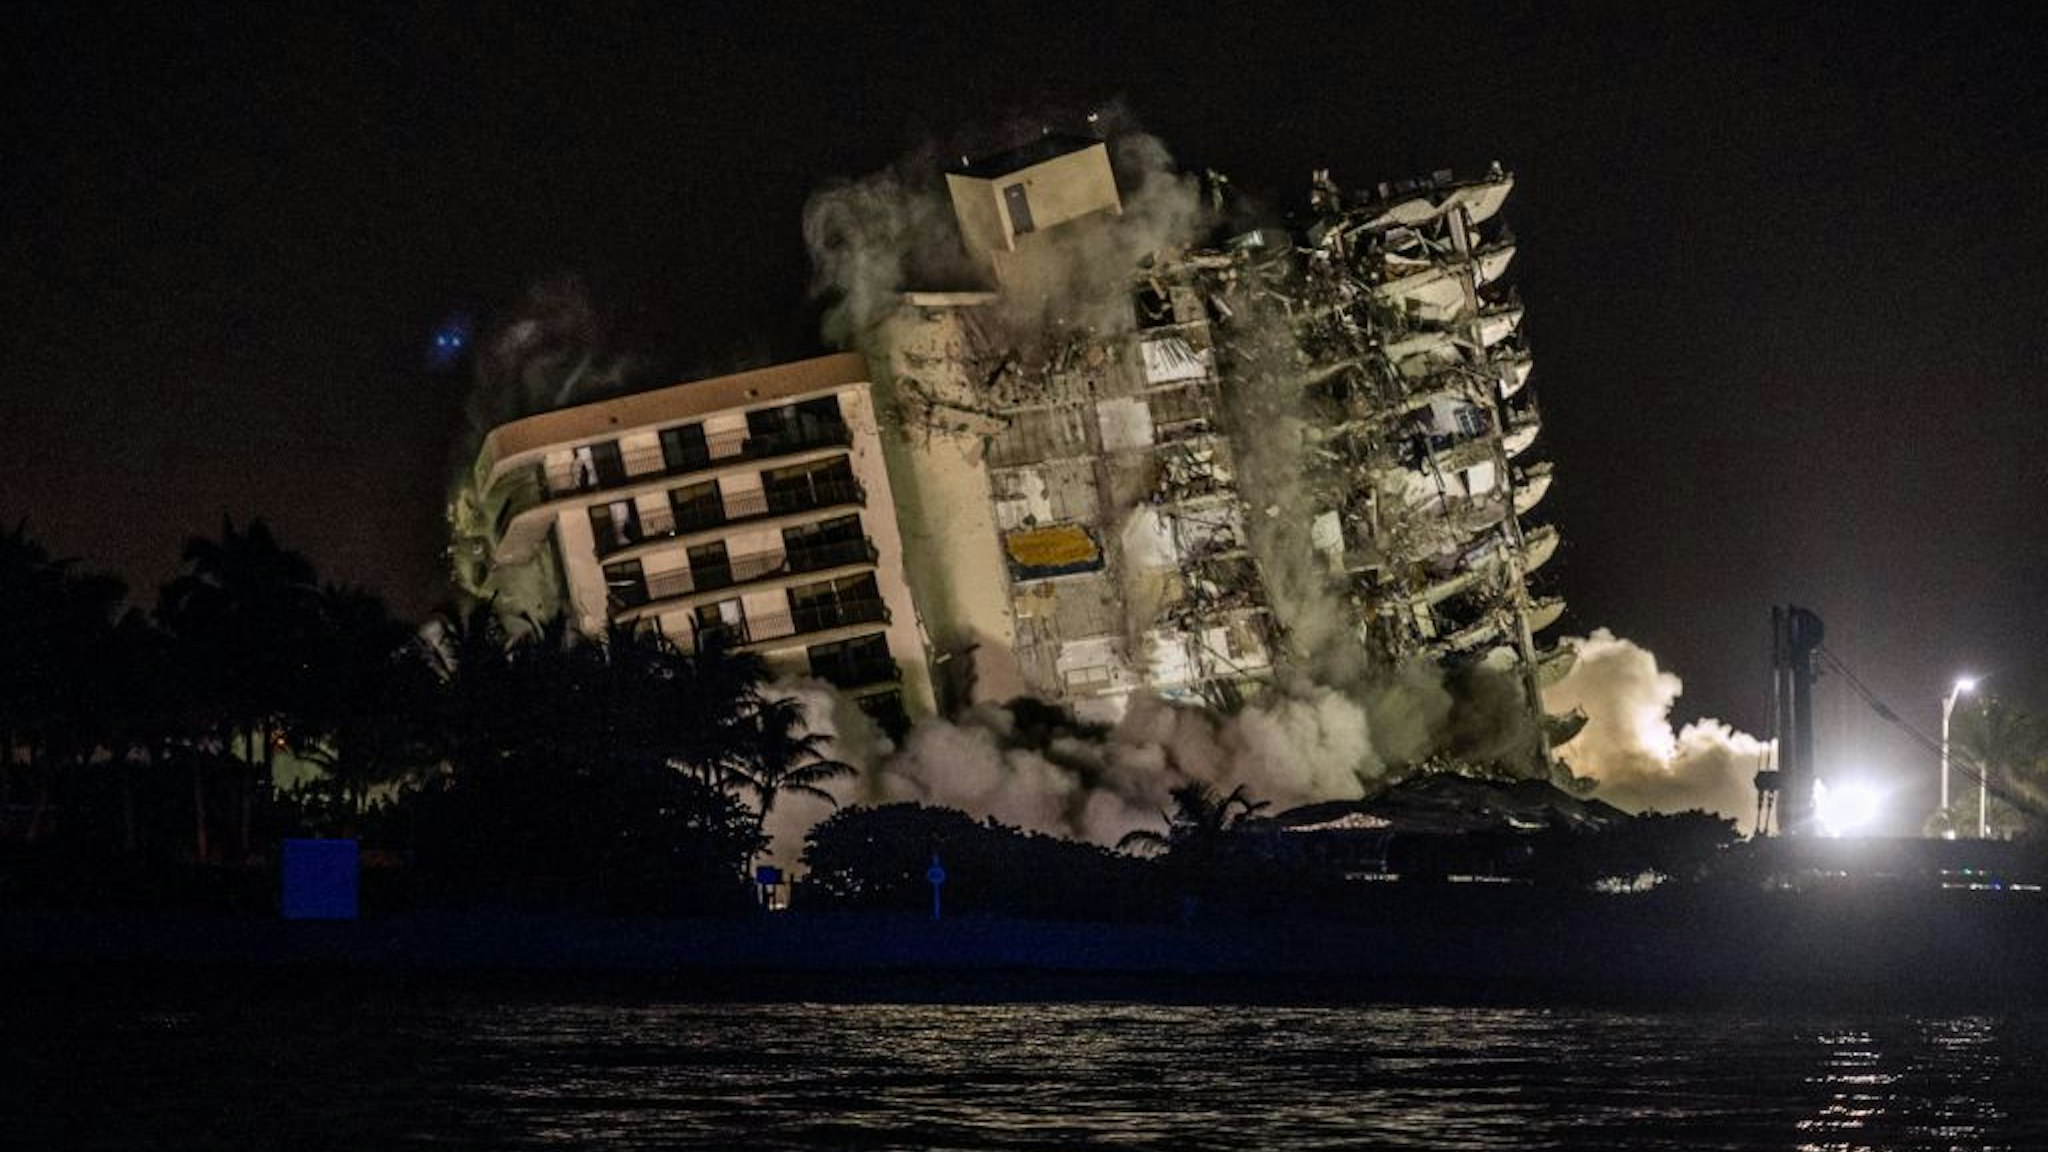 The rest of the Champlain South tower is seen being demolished in Surfside, Florida, north of Miami Beach, late on July 4, 2021. - A controlled explosion brought down the unstable remains of the collapsed apartment block in Florida late on July 4 ahead of a threatening tropical storm as rescuers prepare to resume searching for victims. (Photo by Giorgio VIERA / AFP) (Photo by GIORGIO VIERA/AFP via Getty Images)